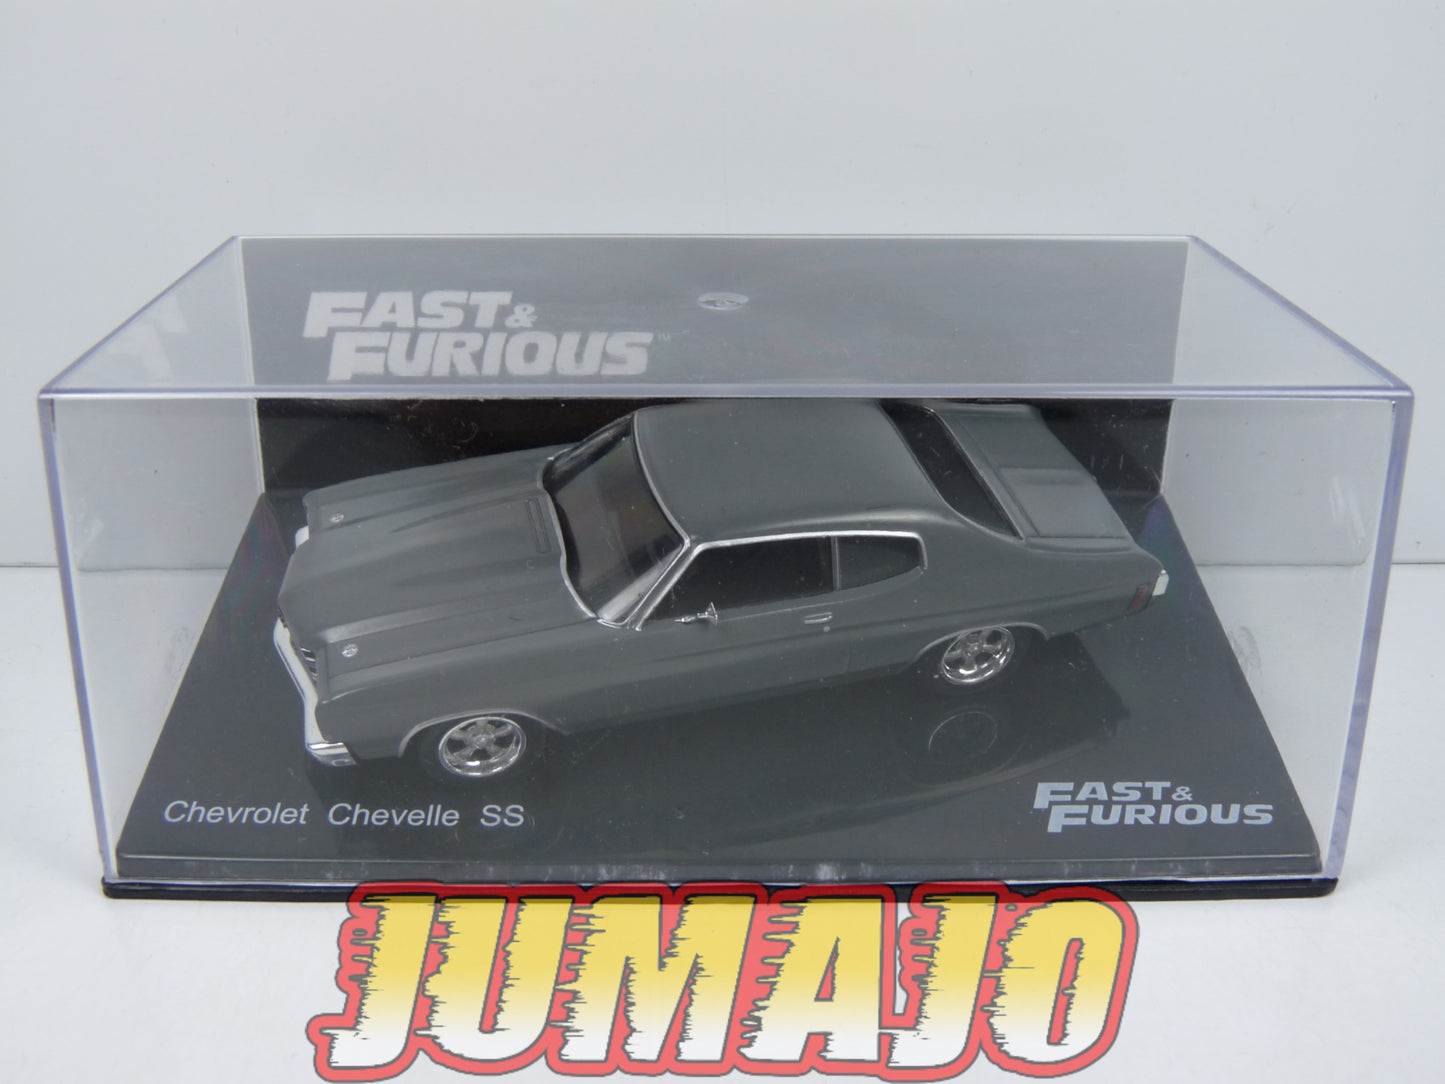 FF15 Voiture 1/43 IXO altaya Fast and Furious : Chevrolet Chevelle SS